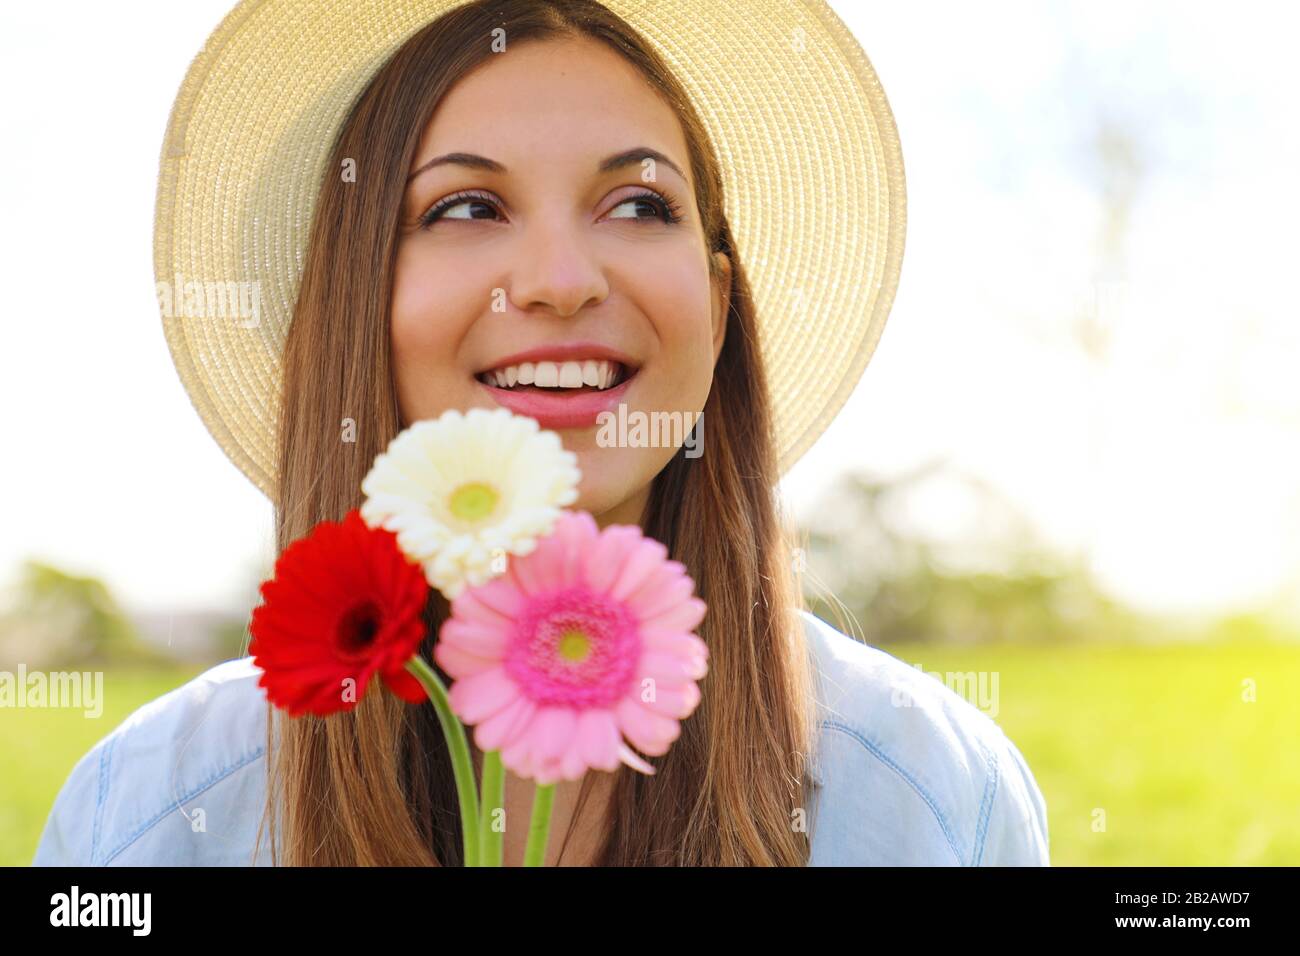 Spring girl holds flowers looking to the side outdoor. Beautiful smiling young woman with hat holding flowers in park and looks around. Stock Photo